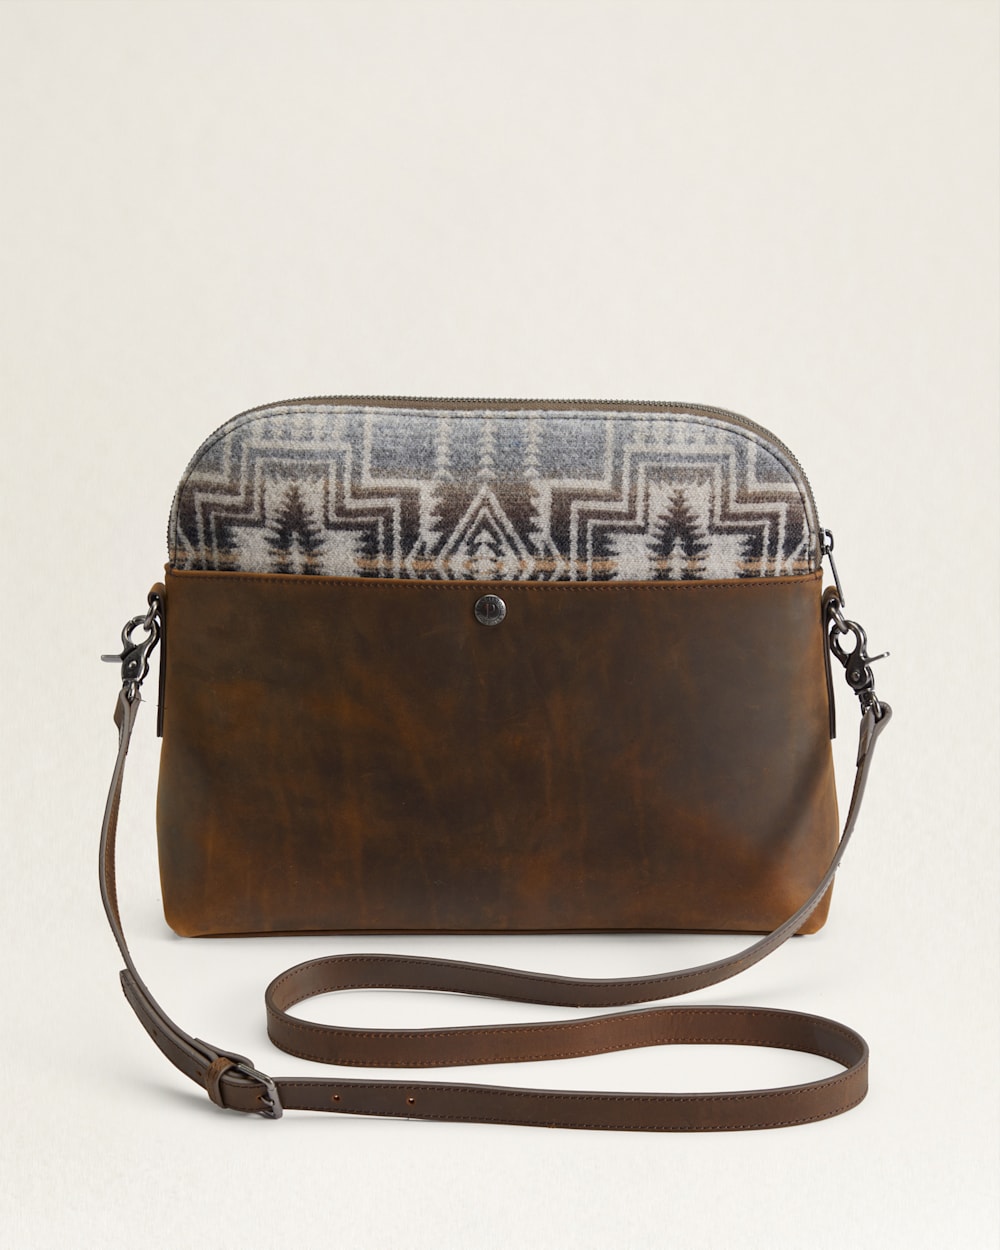 ALTERNATE VIEW OF HARDING STAR WOOL/LEATHER CROSSBODY BAG IN GREY MIX image number 2